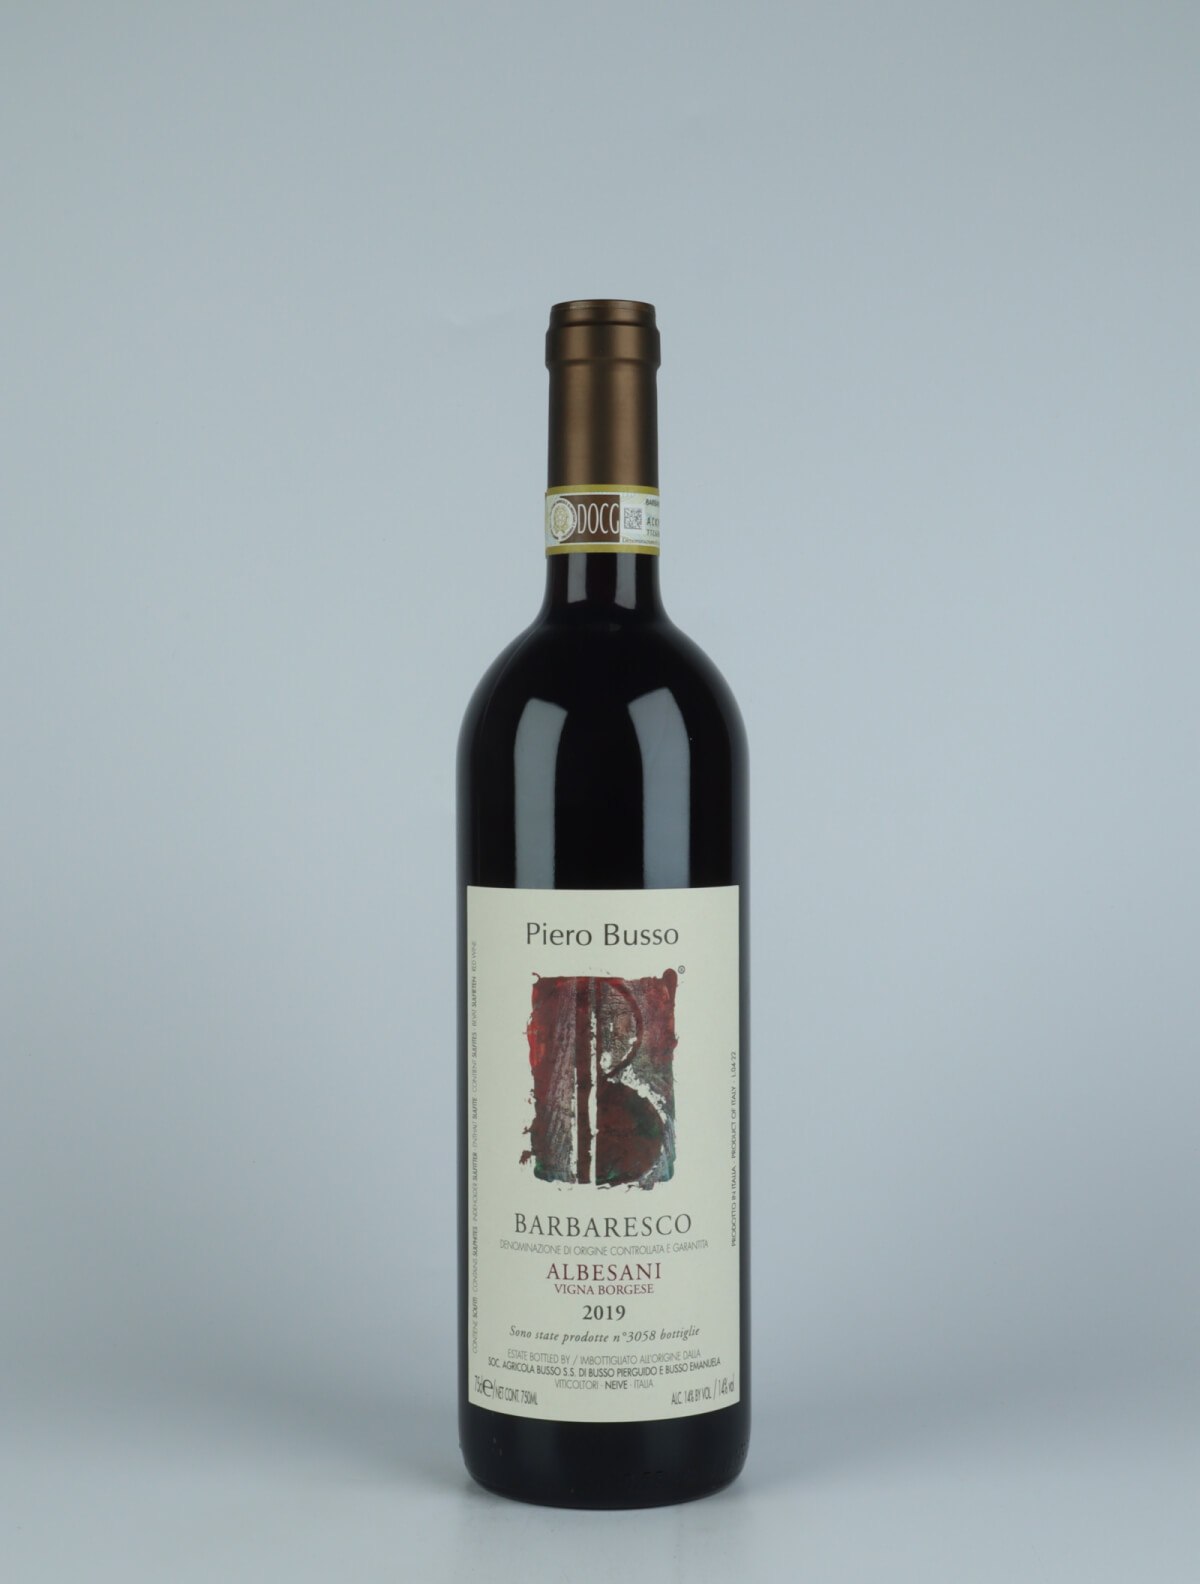 A bottle 2019 Barbaresco Albesani Vigna Borgese Red wine from Piero Busso, Piedmont in Italy